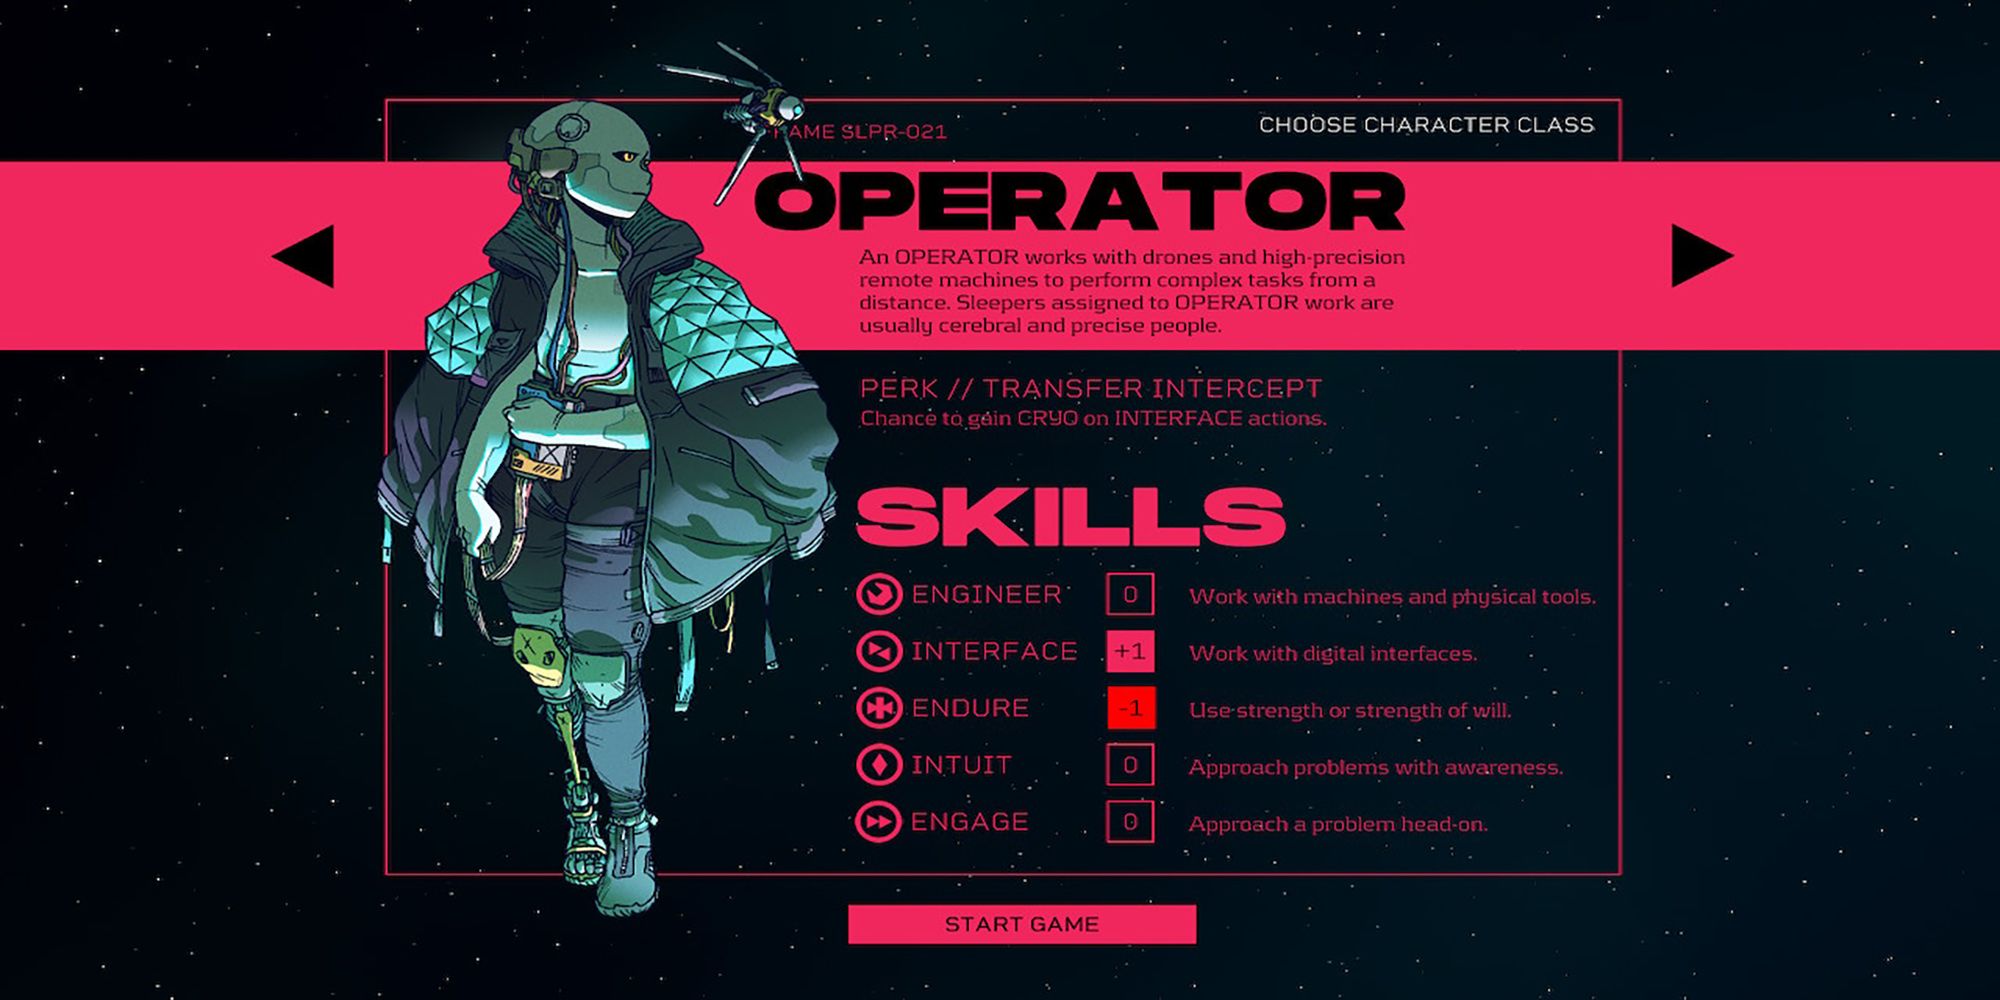 A breakdown of the Operator Class's skills and perks in Citizen Sleeper.